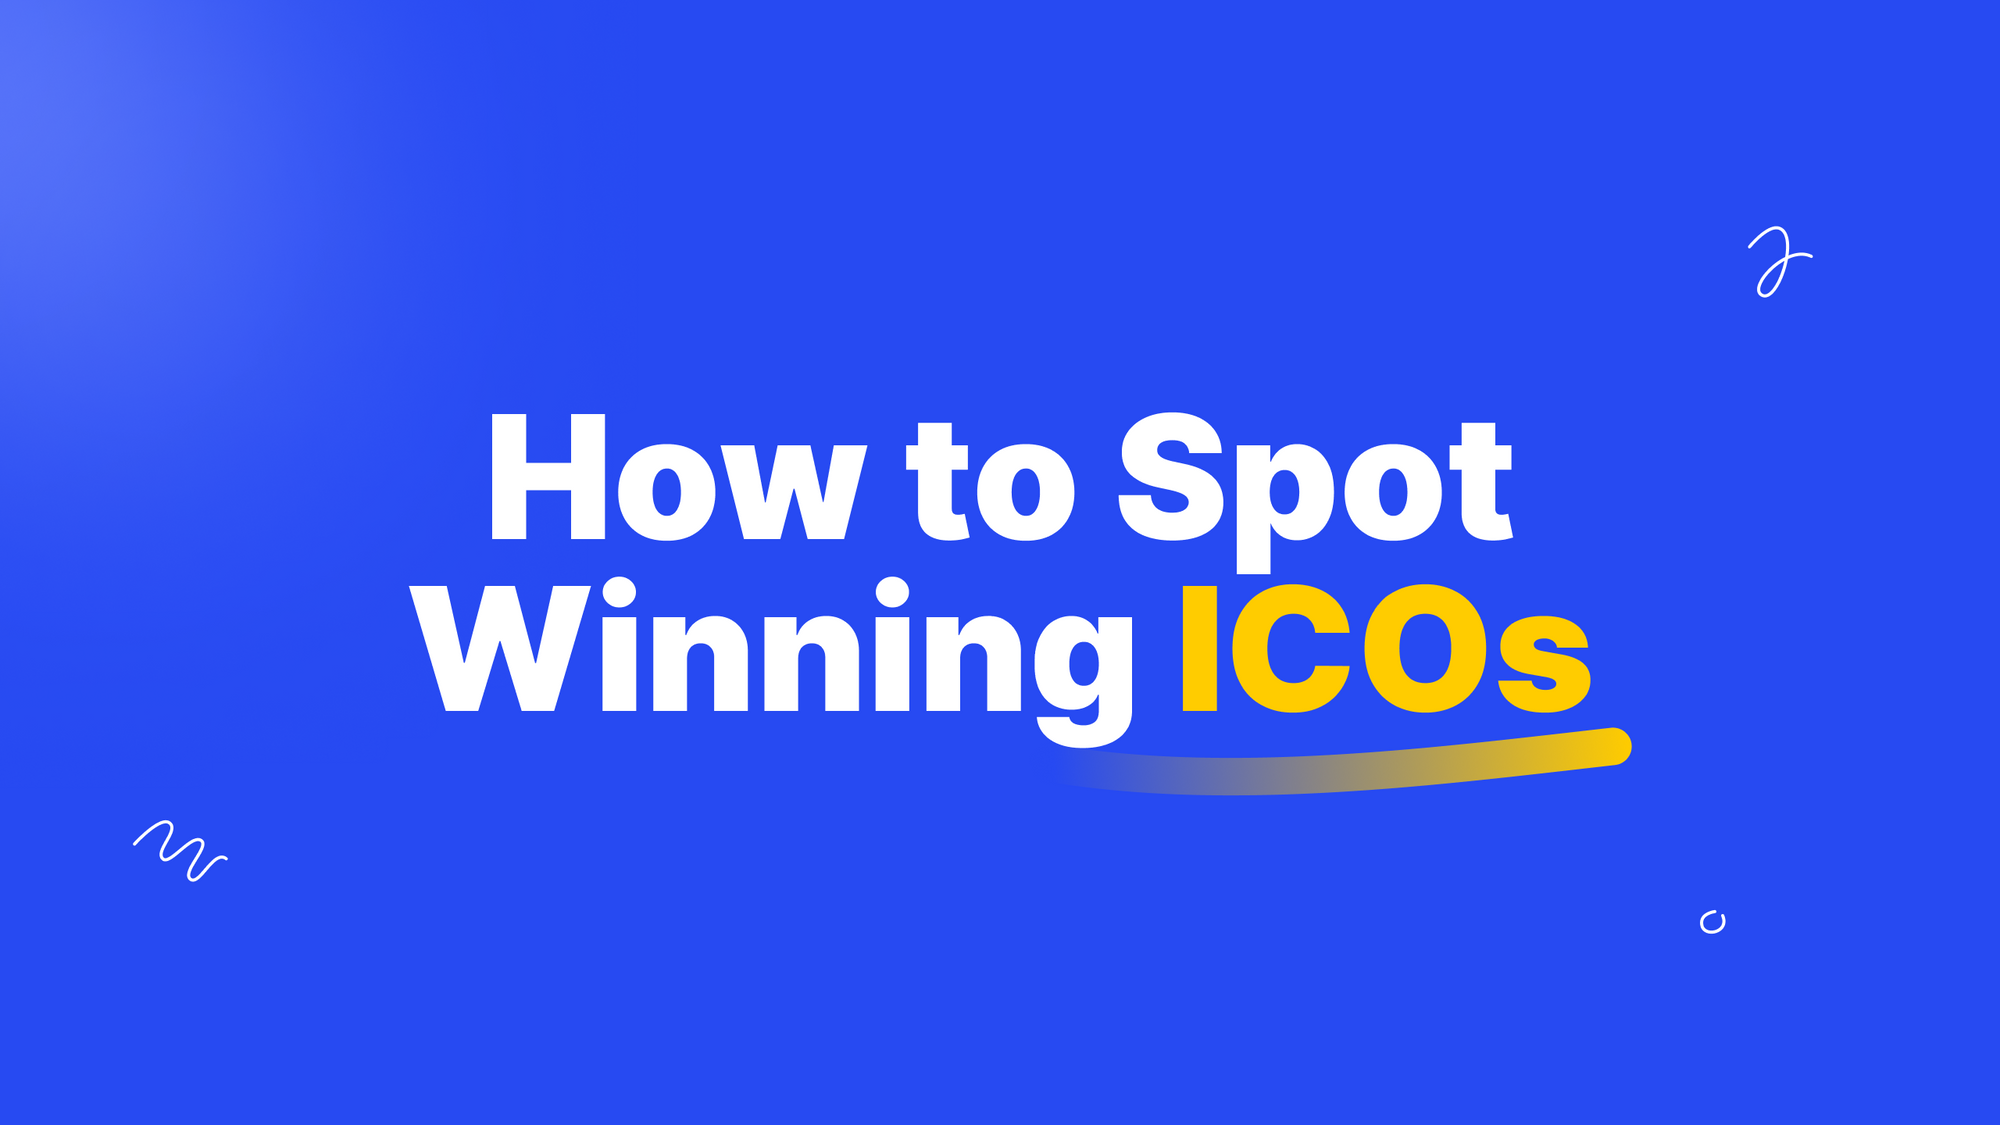 New Projects and ICOs: How to Research and Invest